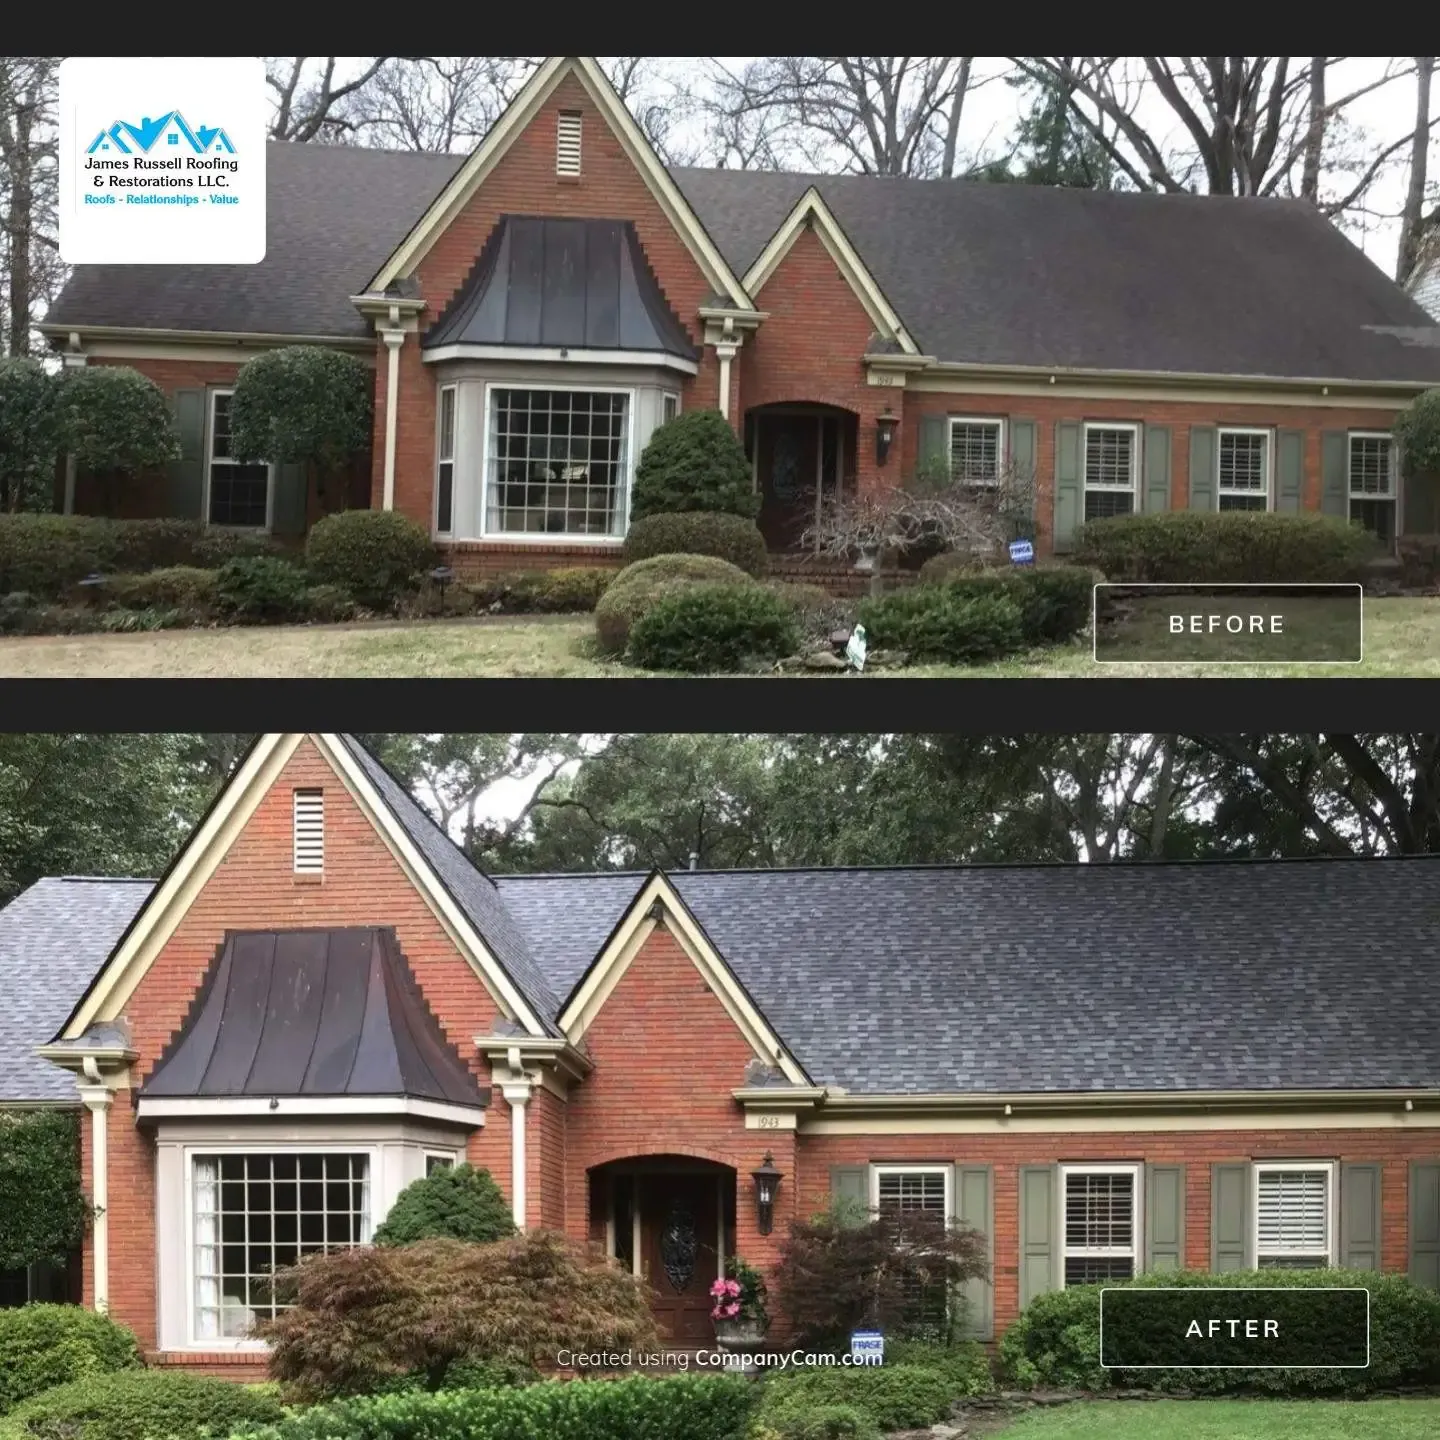 Roofing before and after by James Russell Roofing.